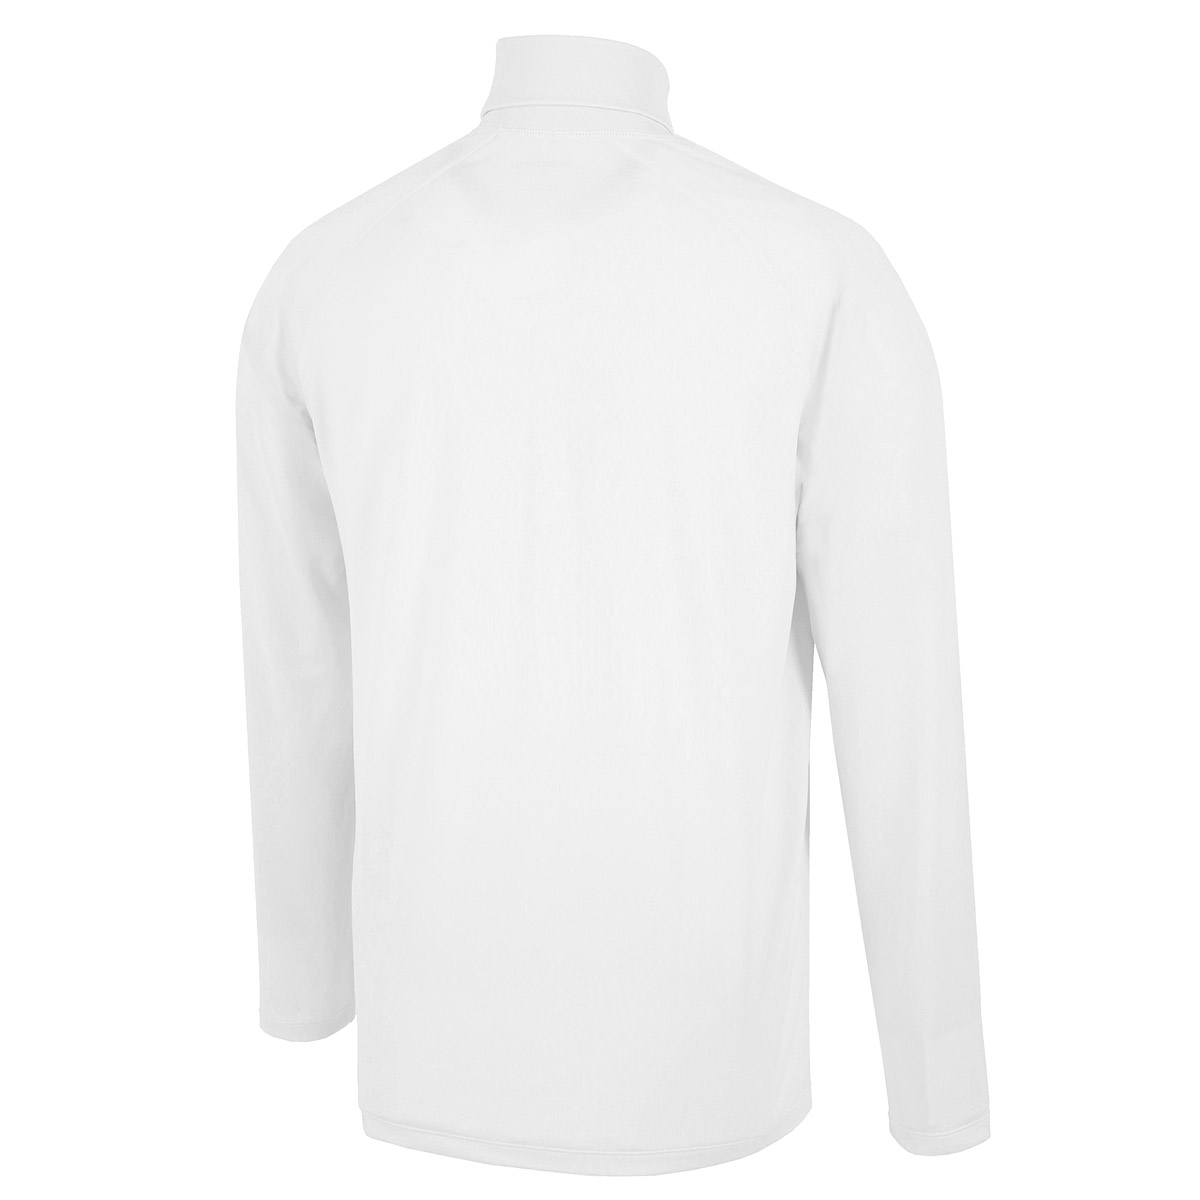 Galvin Green Men's Edwin Roll Neck Thermal Golf Base Layer from ...